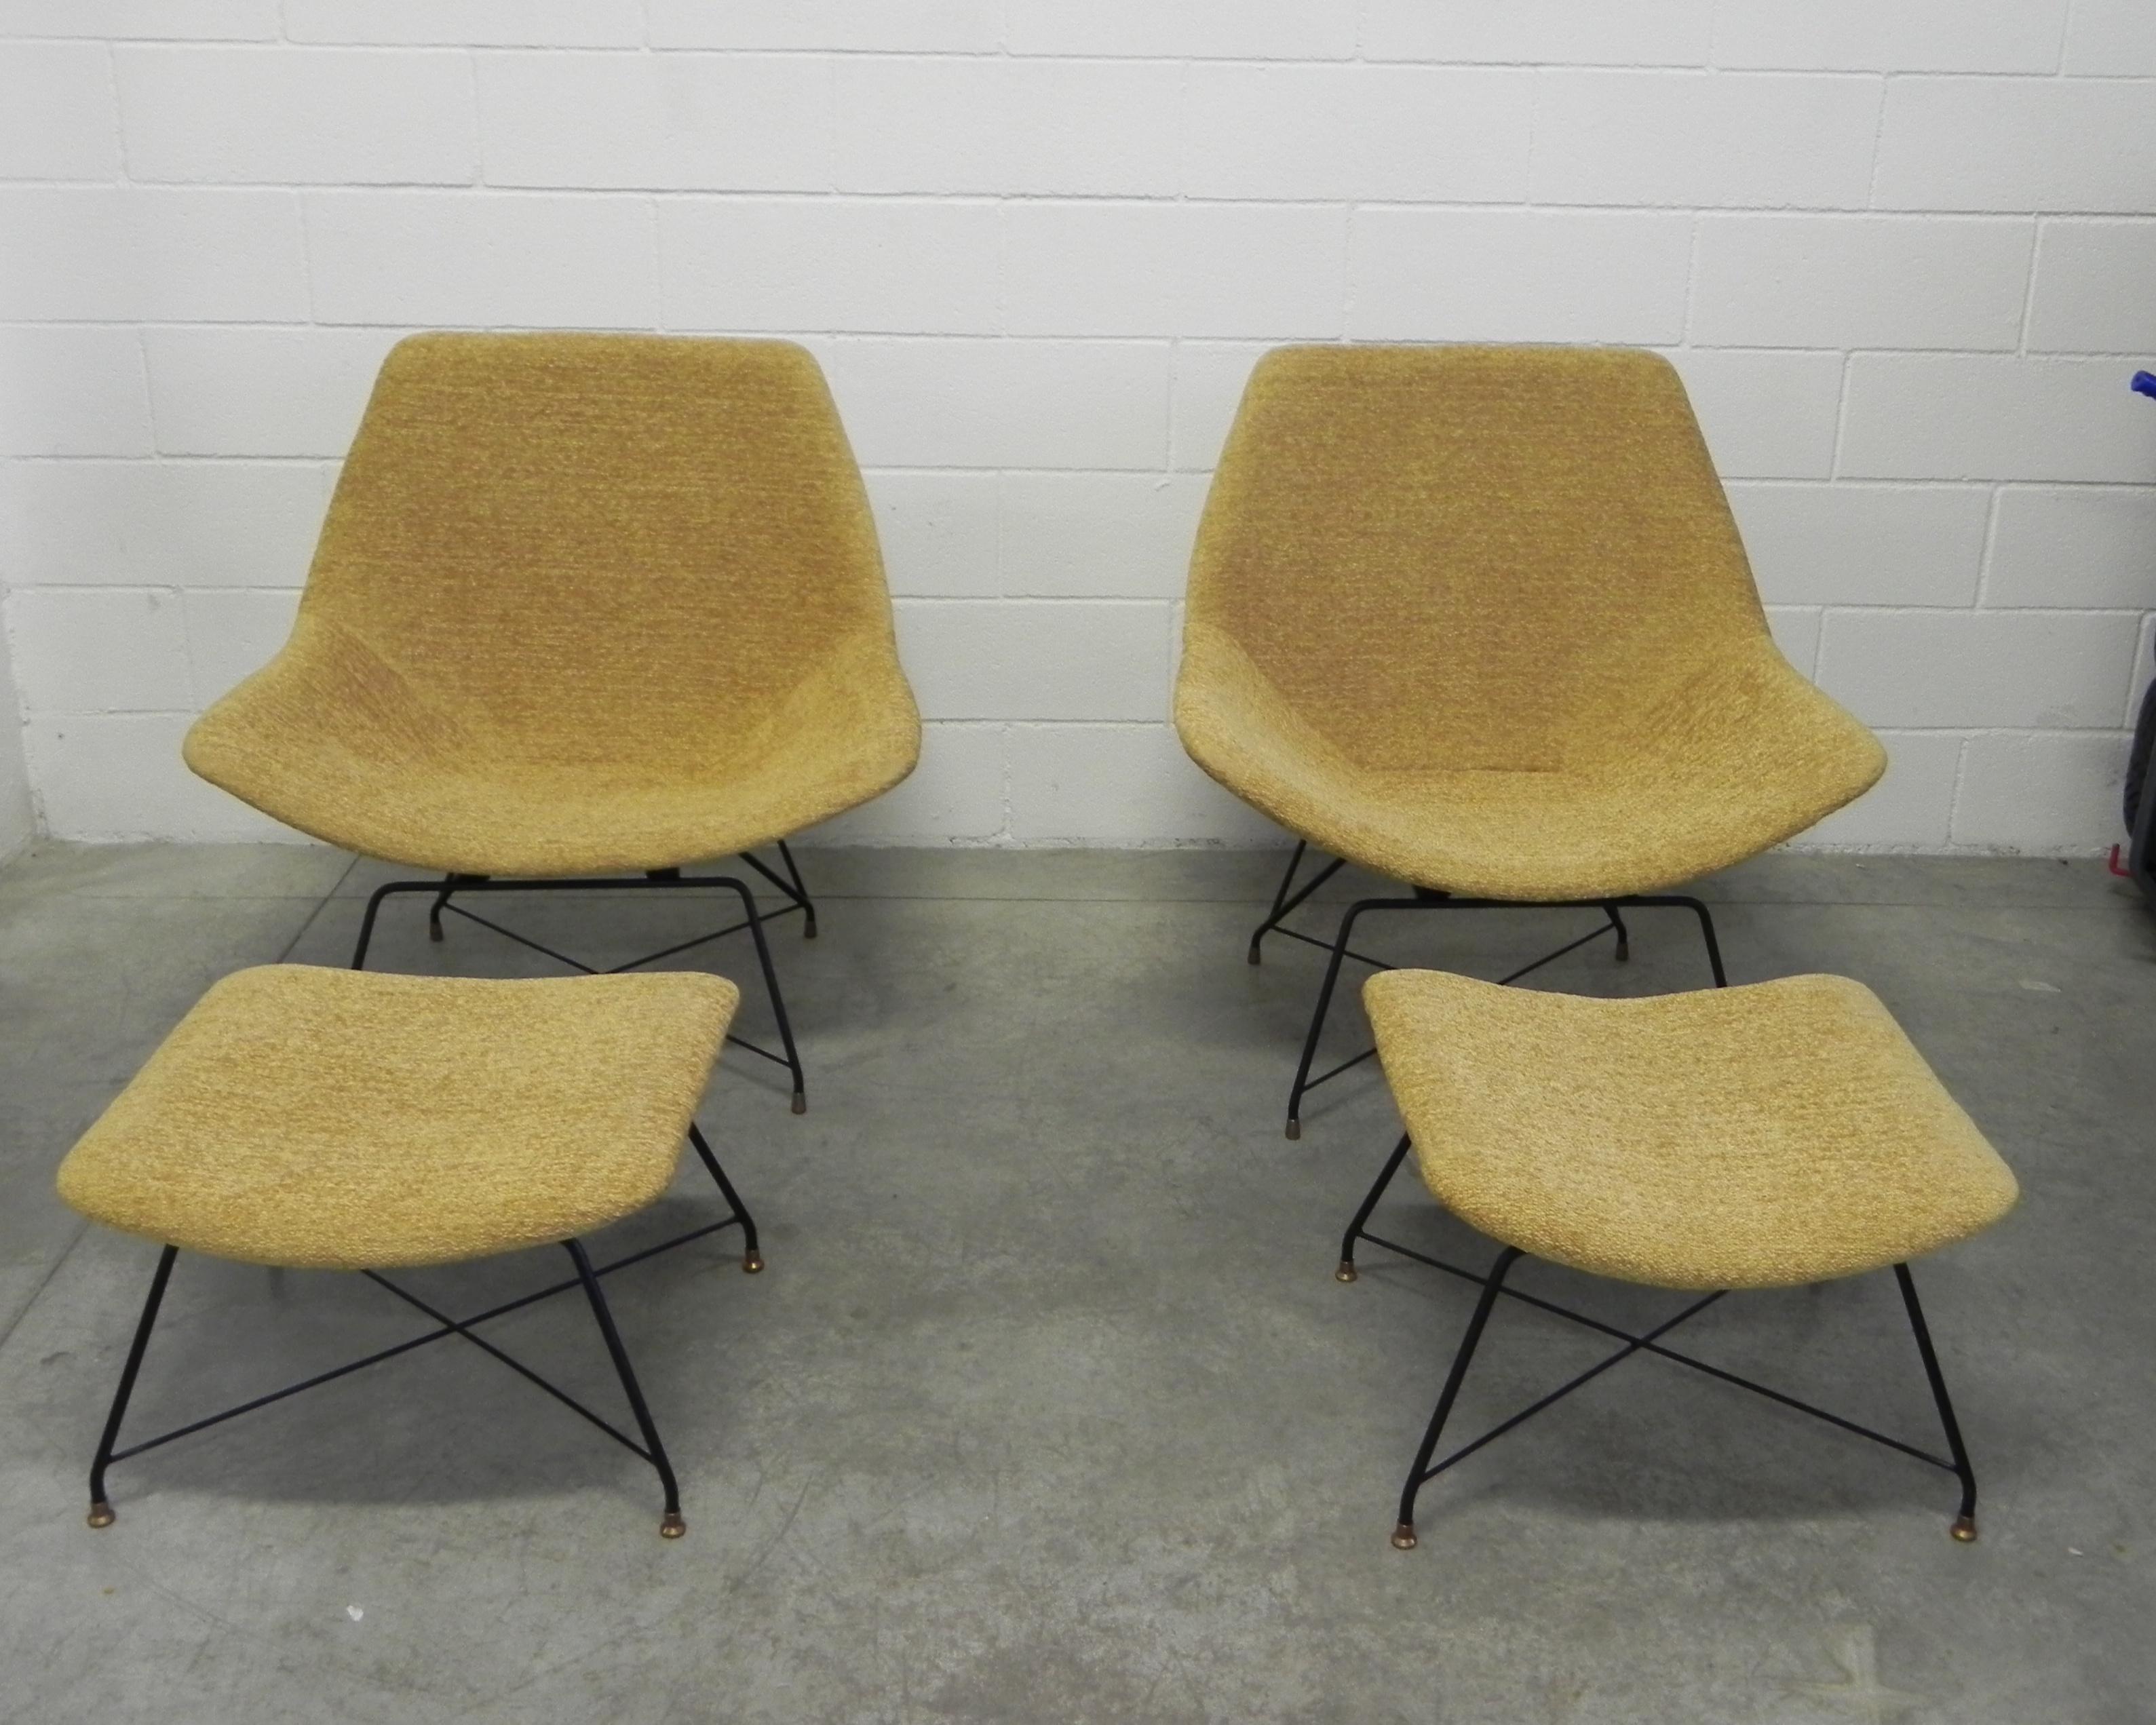 Rare pair of lounge chairs whit ottoman designed by Augusto Bozzi for Saporiti Italia, Italy, 1954. The chairs have a black lacquered metal base with solid brass feet and are newly upholstered. Makers label to underside.